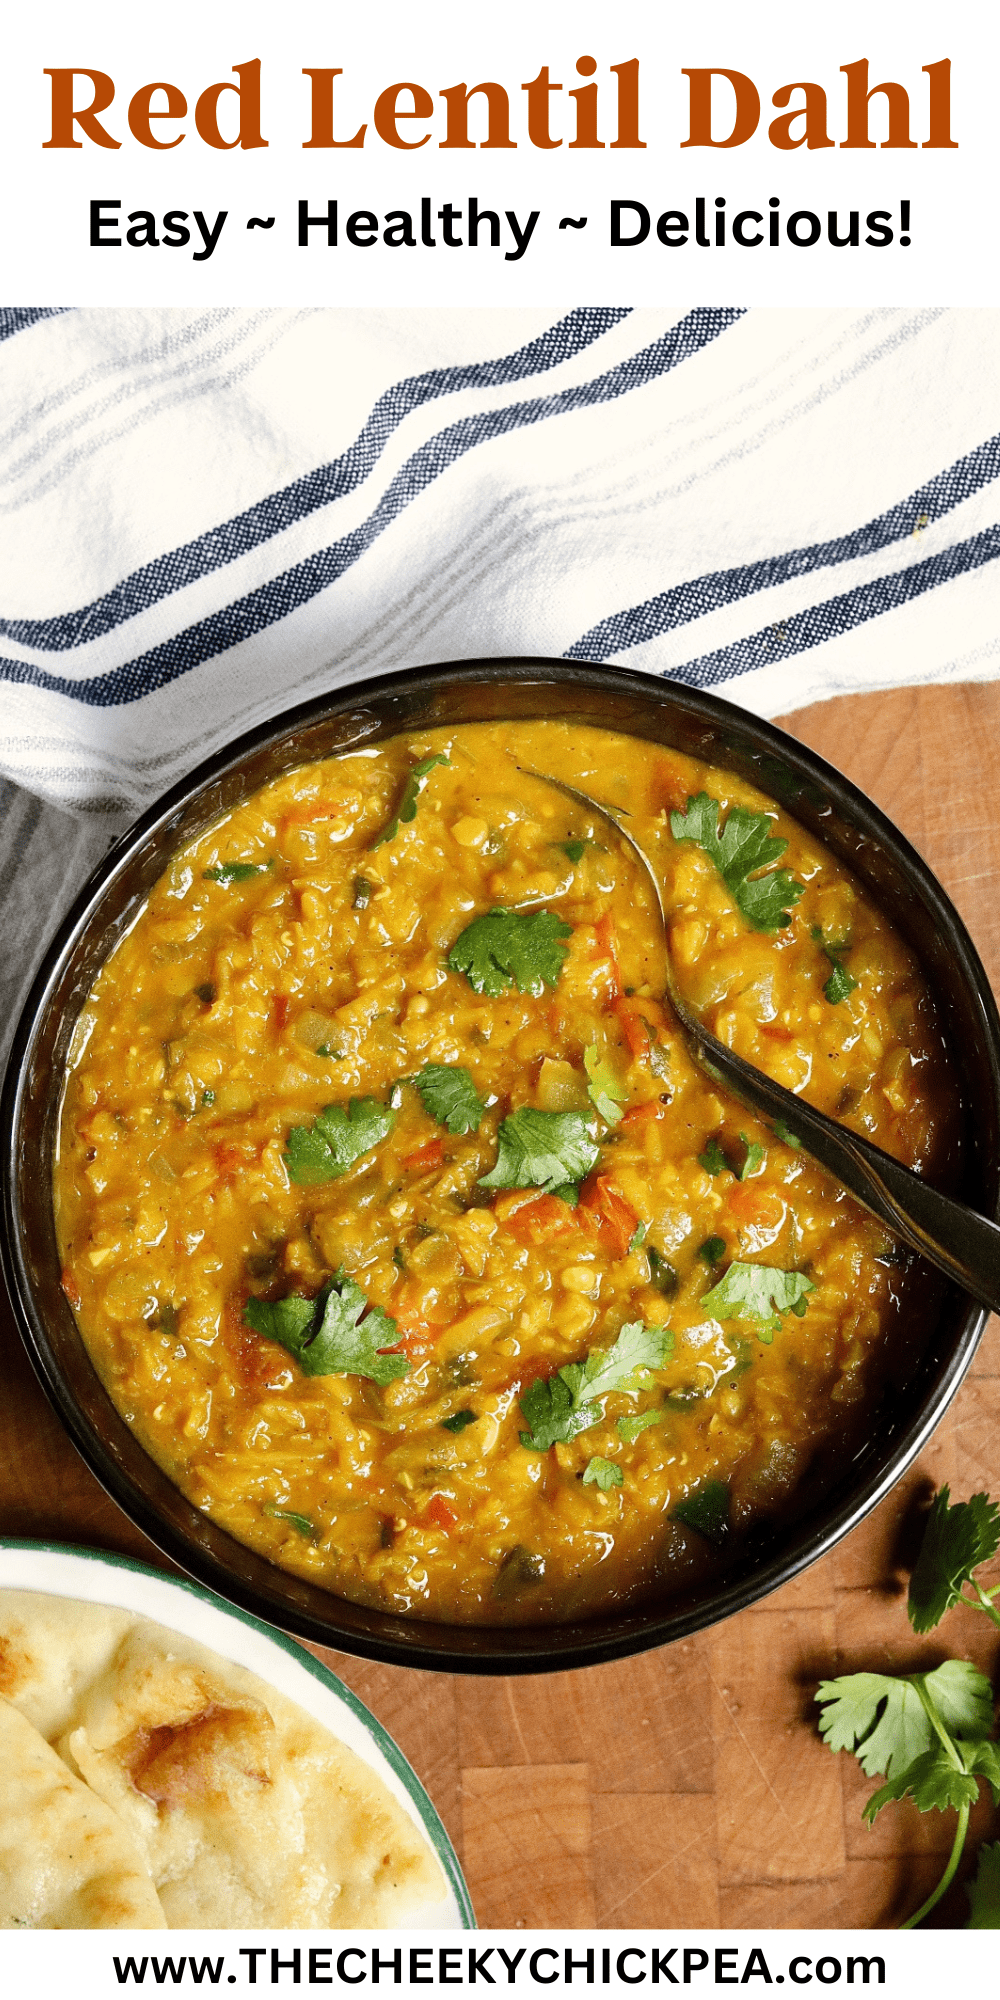 Red Lentil Dahl - The Cheeky Chickpea